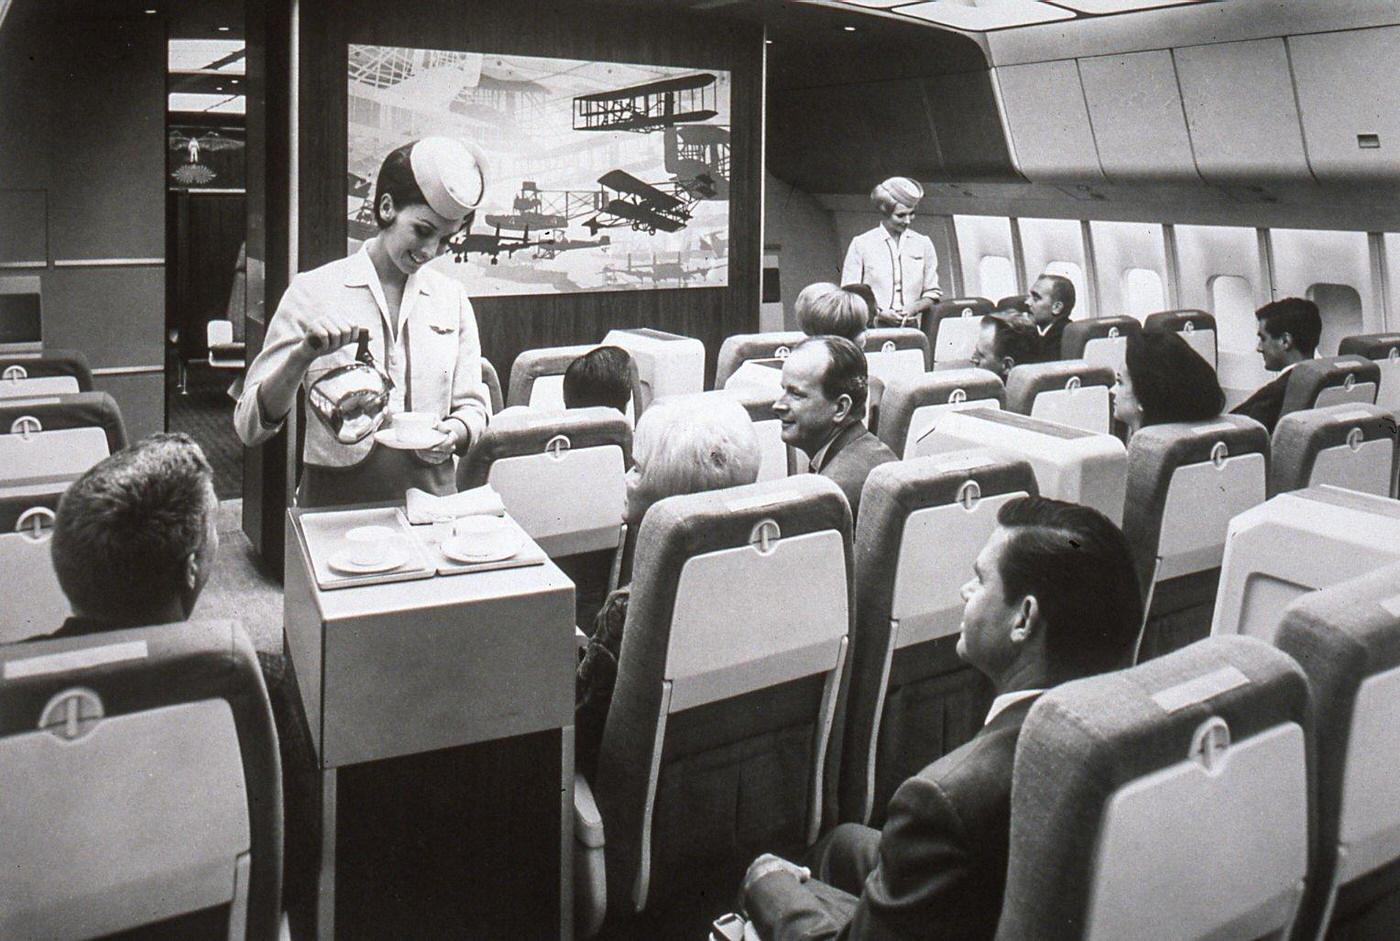 Passengers and flight attendants inside a mock-up interior of a Lockheed L-1011 TriStar passenger aircraft during its development work and design in the United States in 1968.